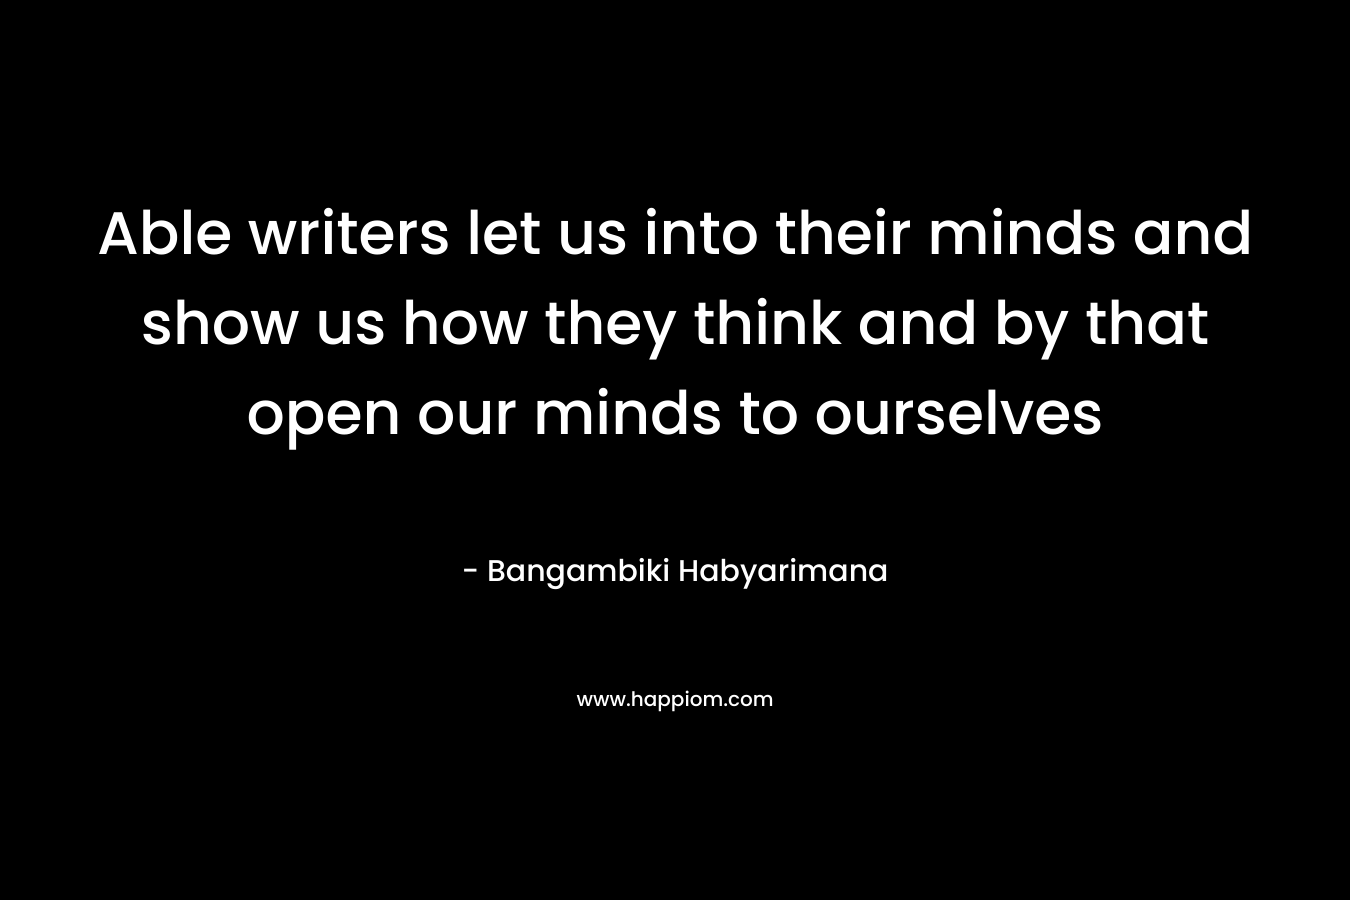 Able writers let us into their minds and show us how they think and by that open our minds to ourselves